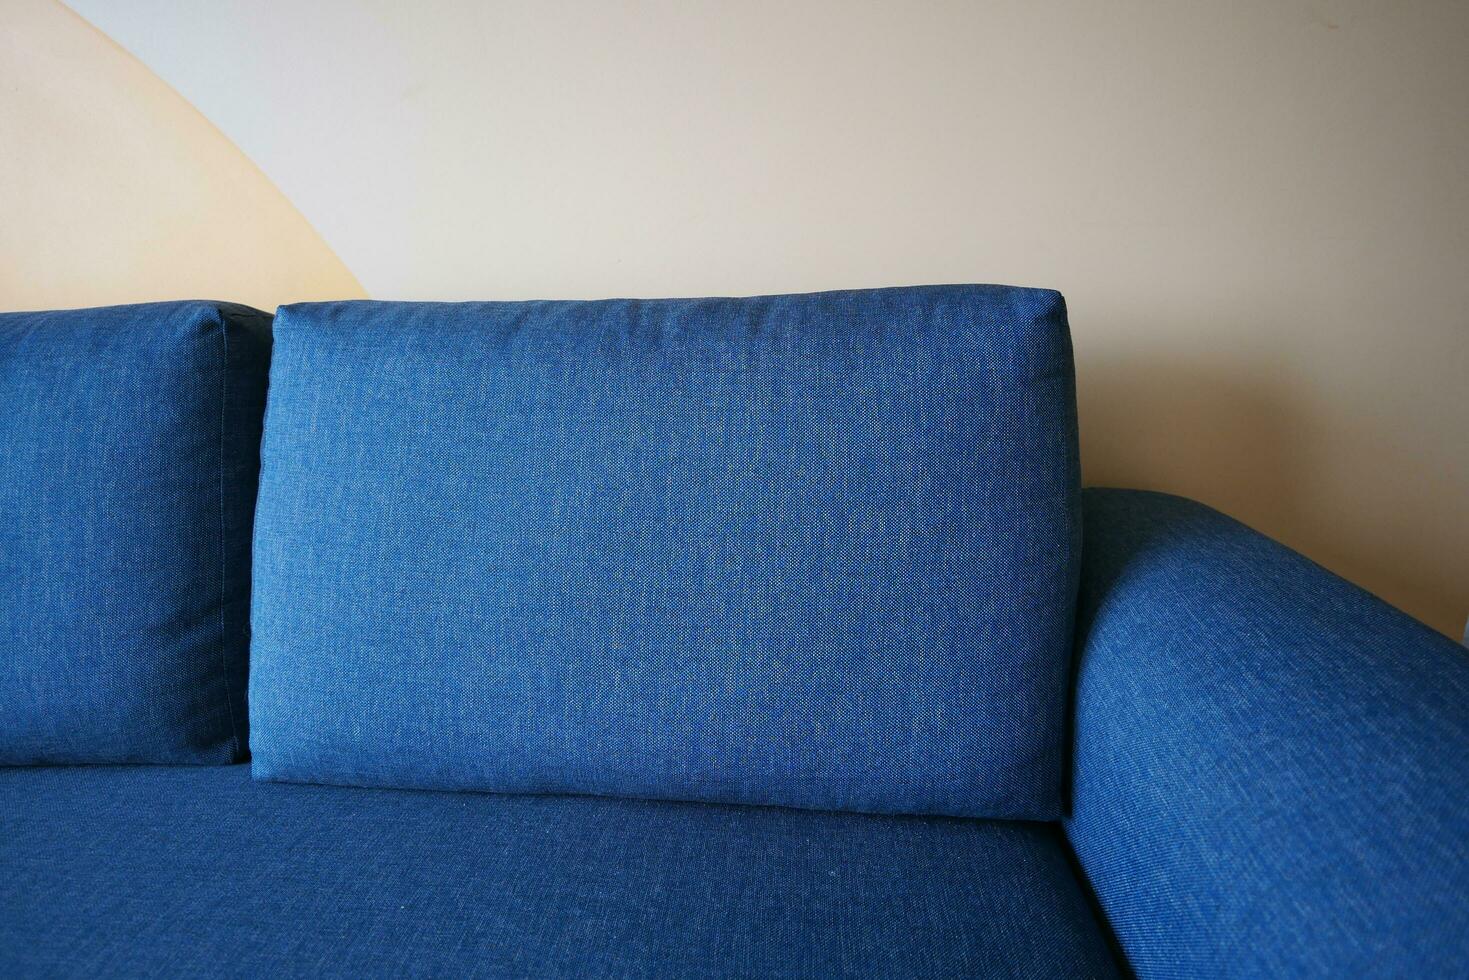 modern blue sofa with pillows in living room at home photo